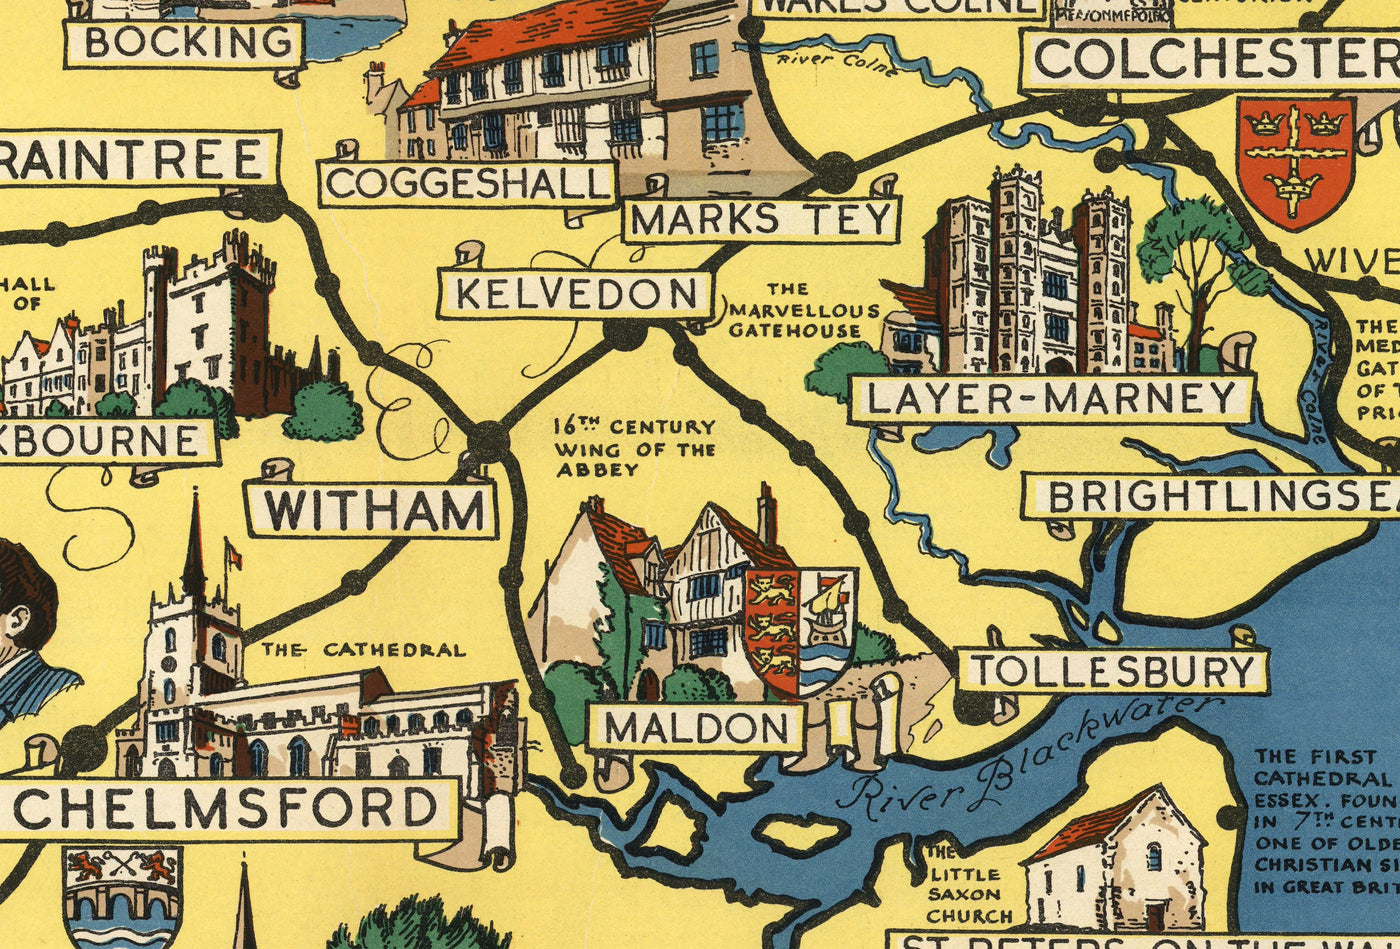 Old Map of Essex, Suffolk, Hertfordshire, 1948 - British Railway Pictorial Chart - Colchester, Southend, St Albans